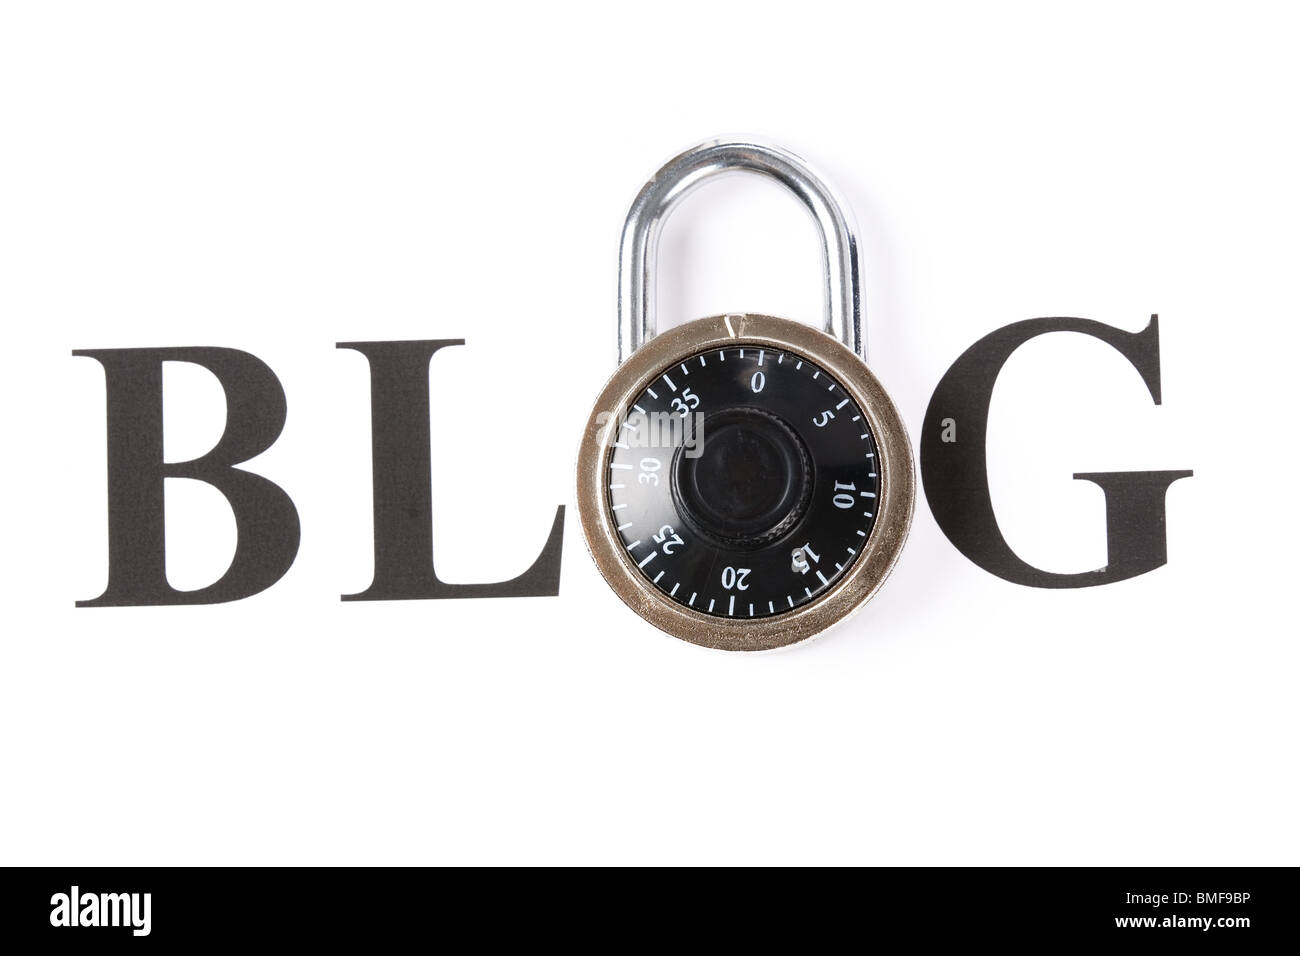 Blog andlock, internet Diary security and privacy Stock Photo